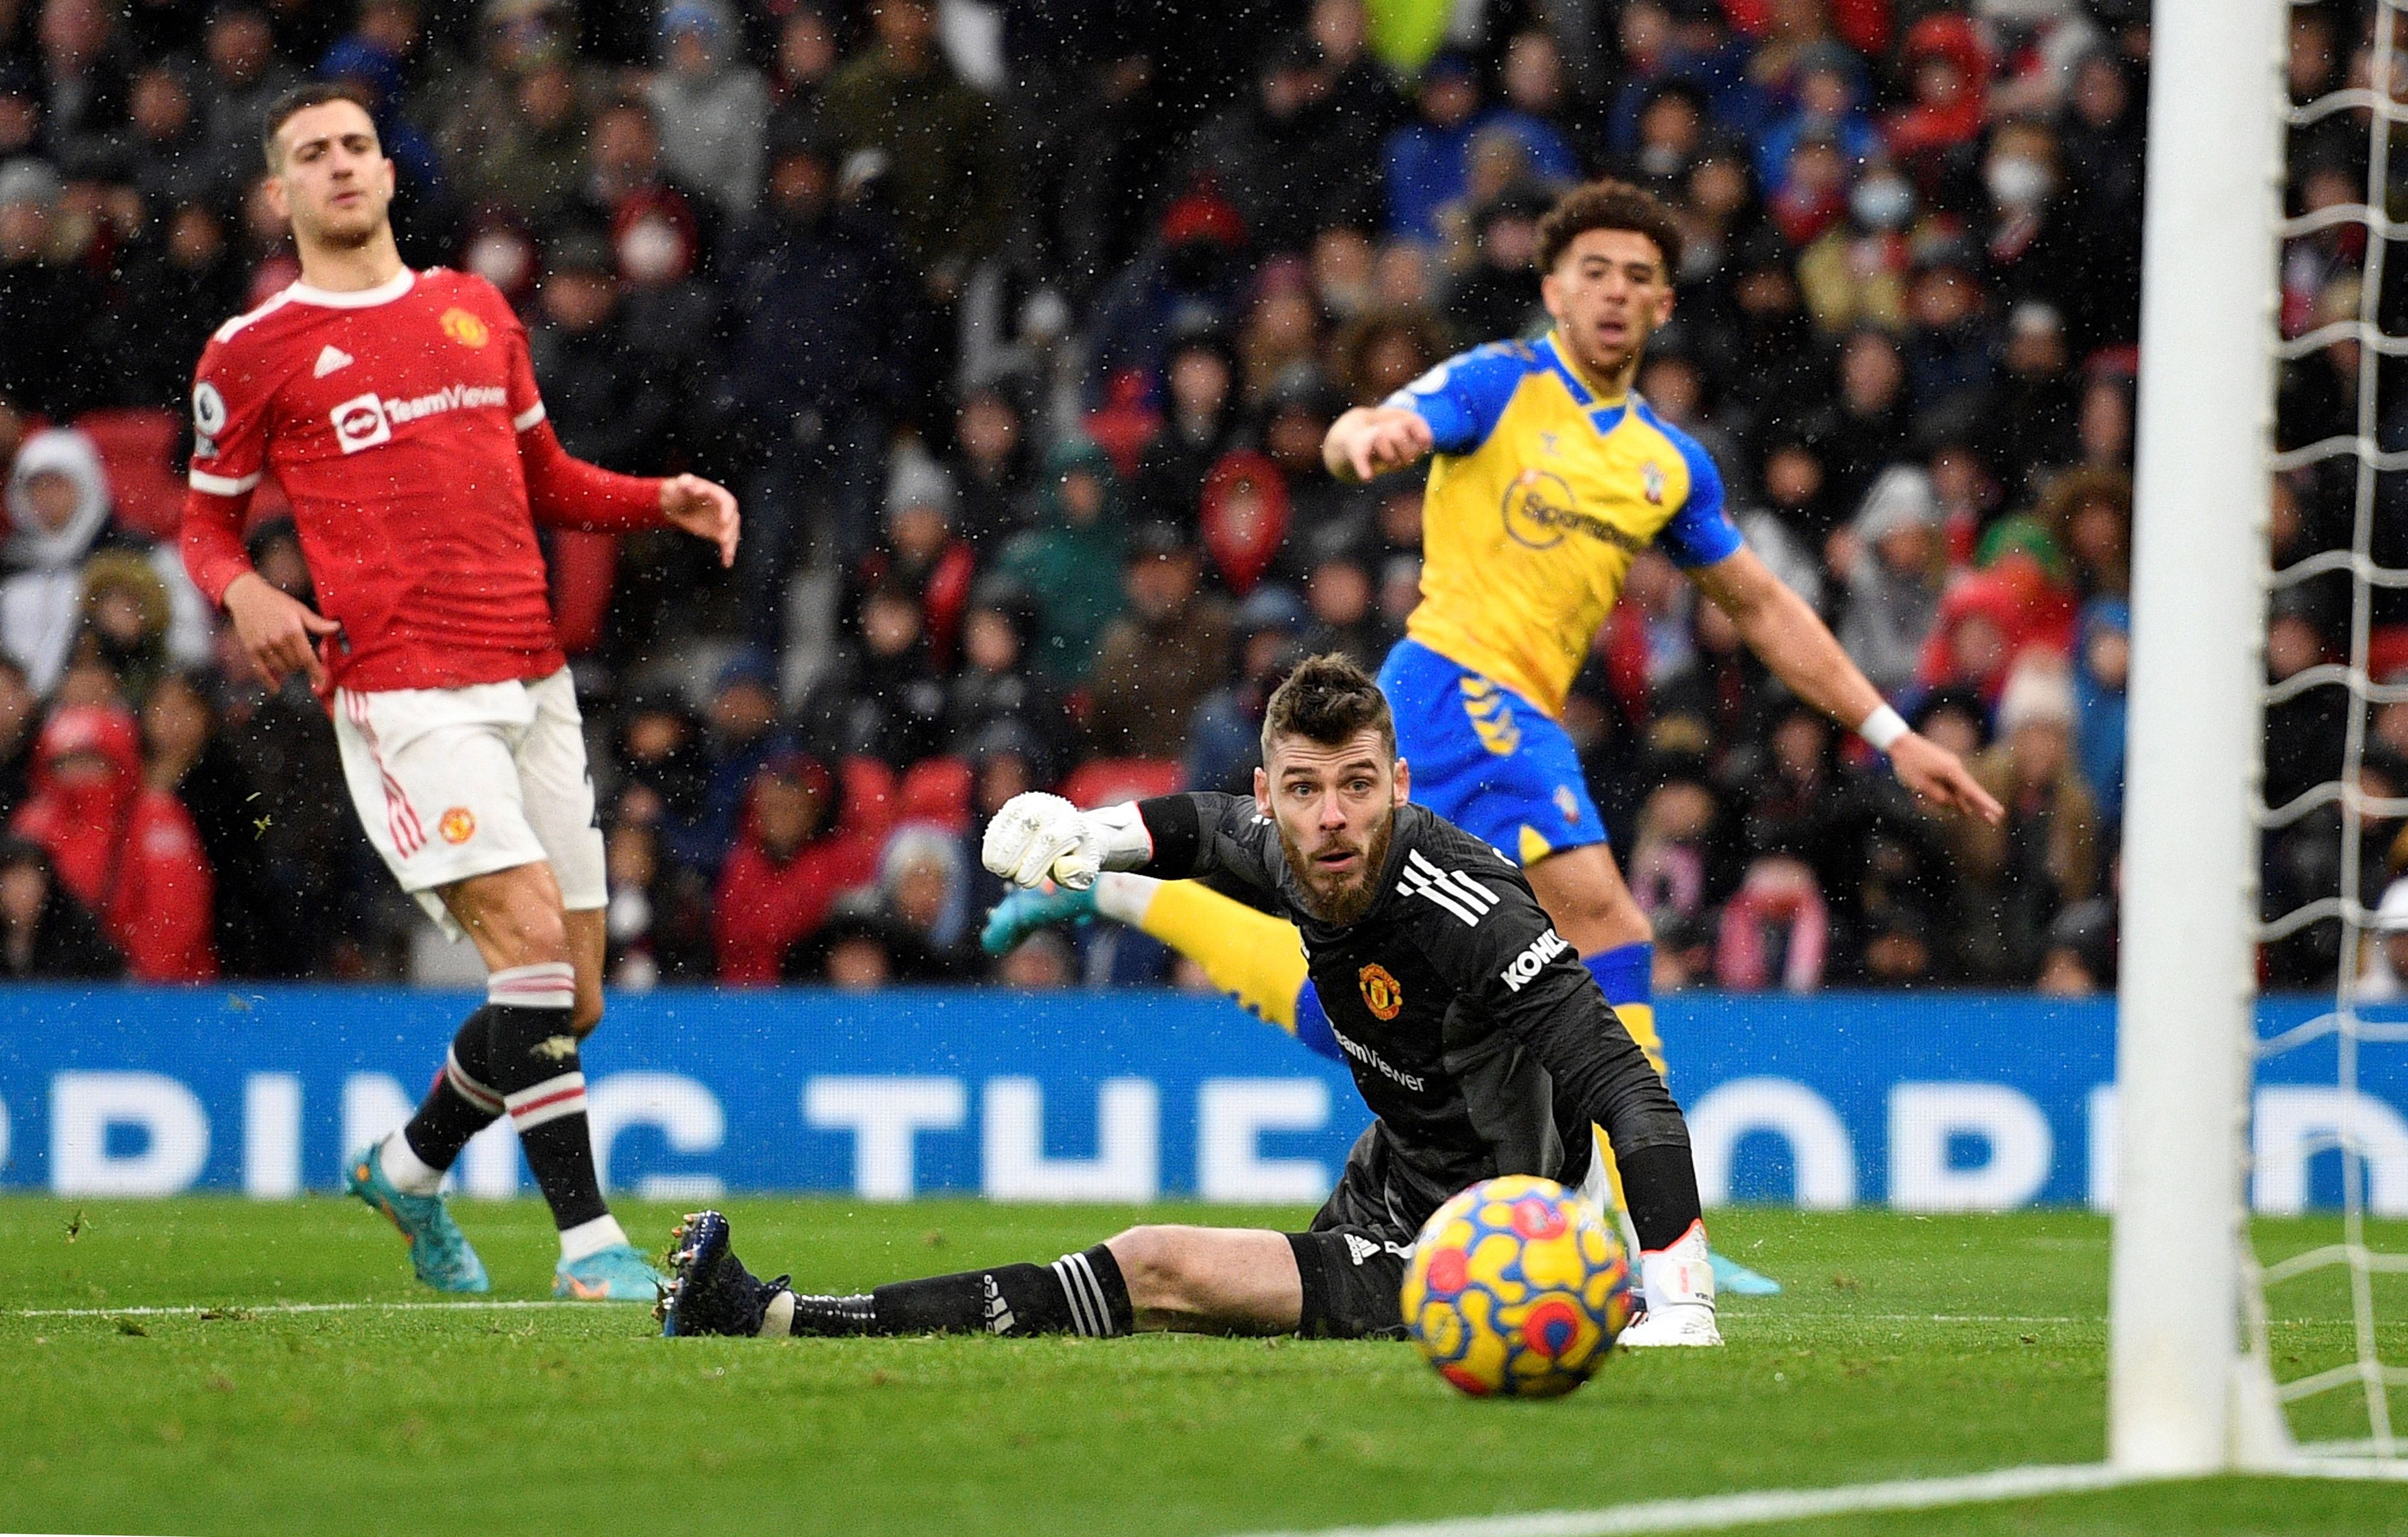 Manchester United 1-1 Southampton Highlights: Jadon Sancho scores his first Premier League goal at Old Trafford as United blow their lead once again